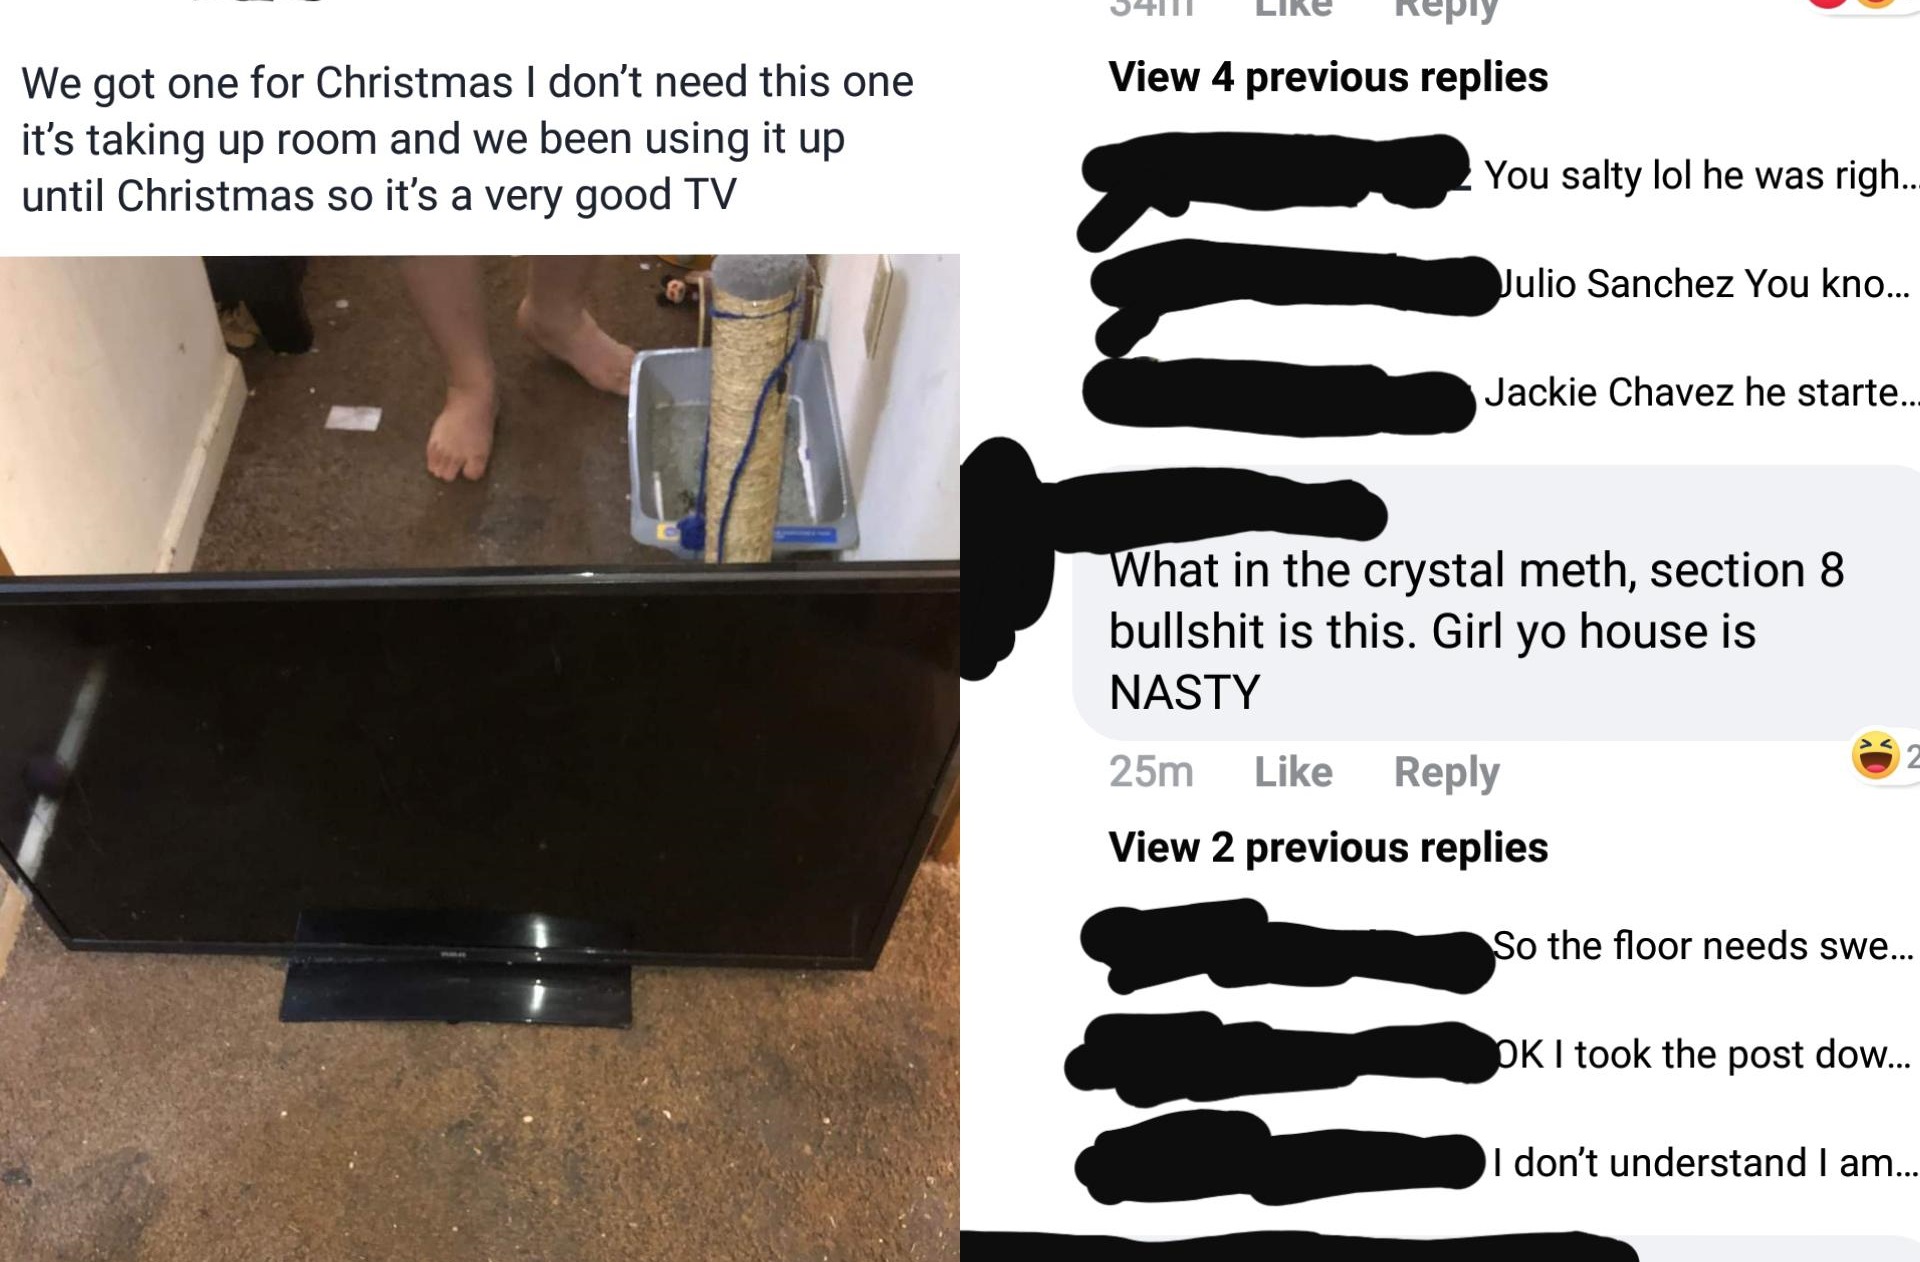 angle - 34111 View 4 previous replies We got one for Christmas I don't need this one it's taking up room and we been using it up until Christmas so it's a very good Tv You salty lol he was righ.. Julio Sanchez You kno... Jackie Chavez he starte... What in